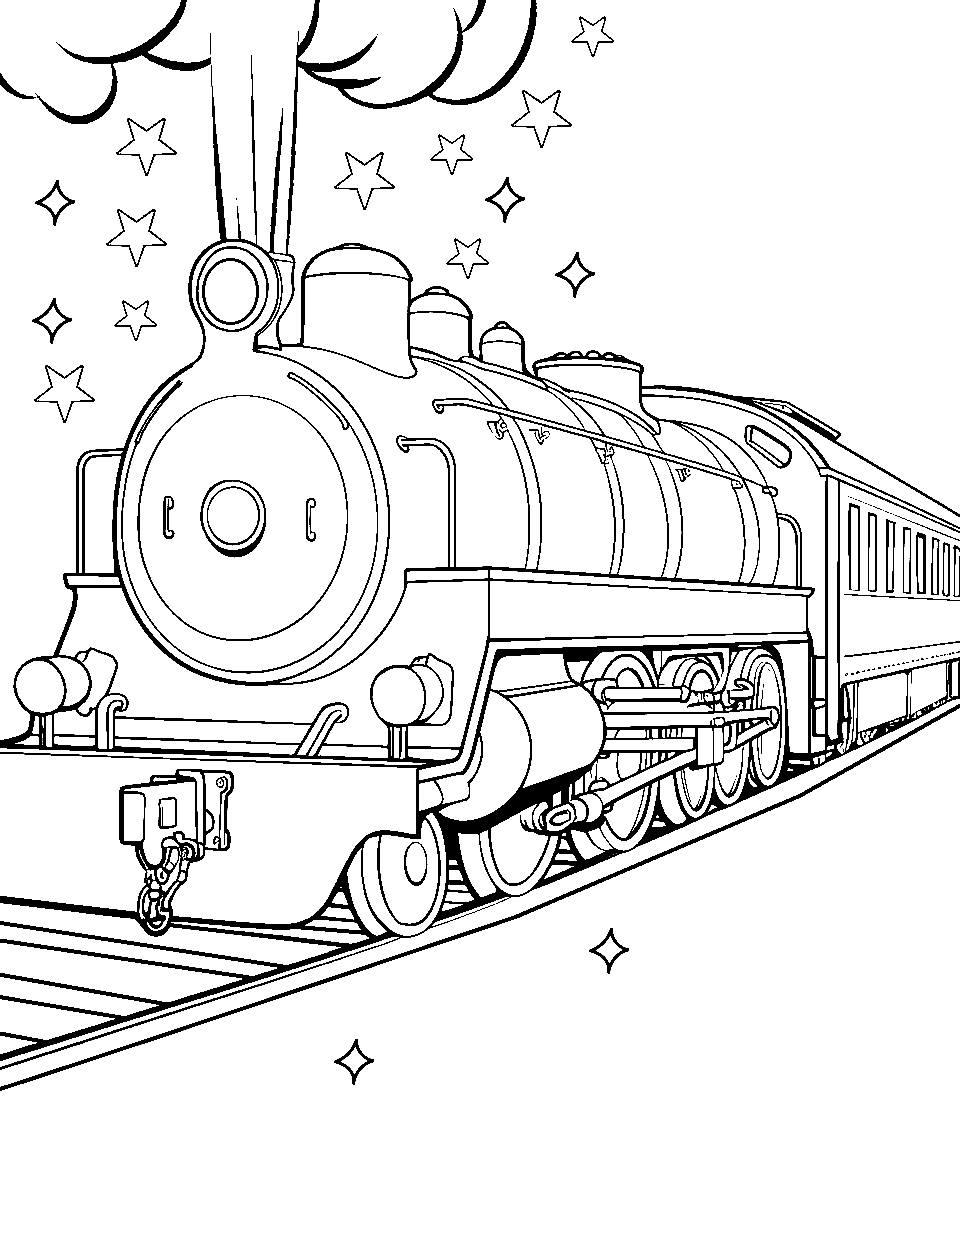 Magical School Train Coloring Page - A train that looks like it’s heading to a magical school.